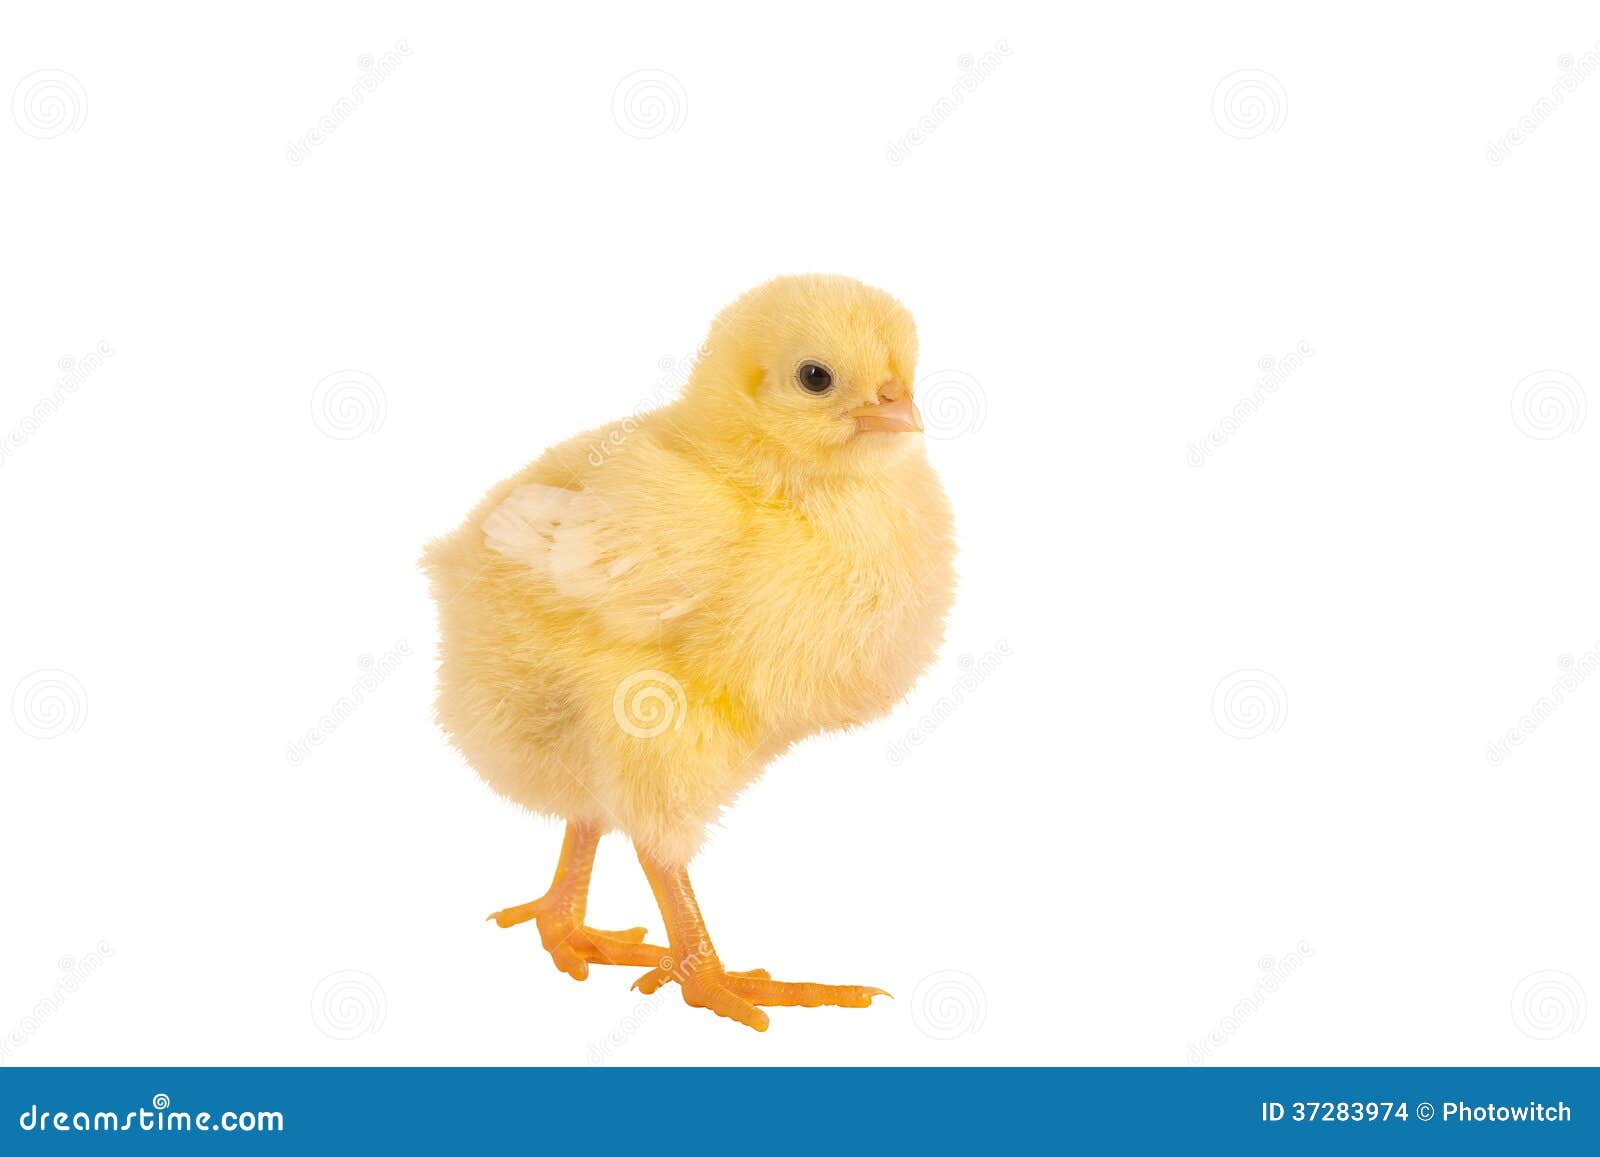 walking easter chick